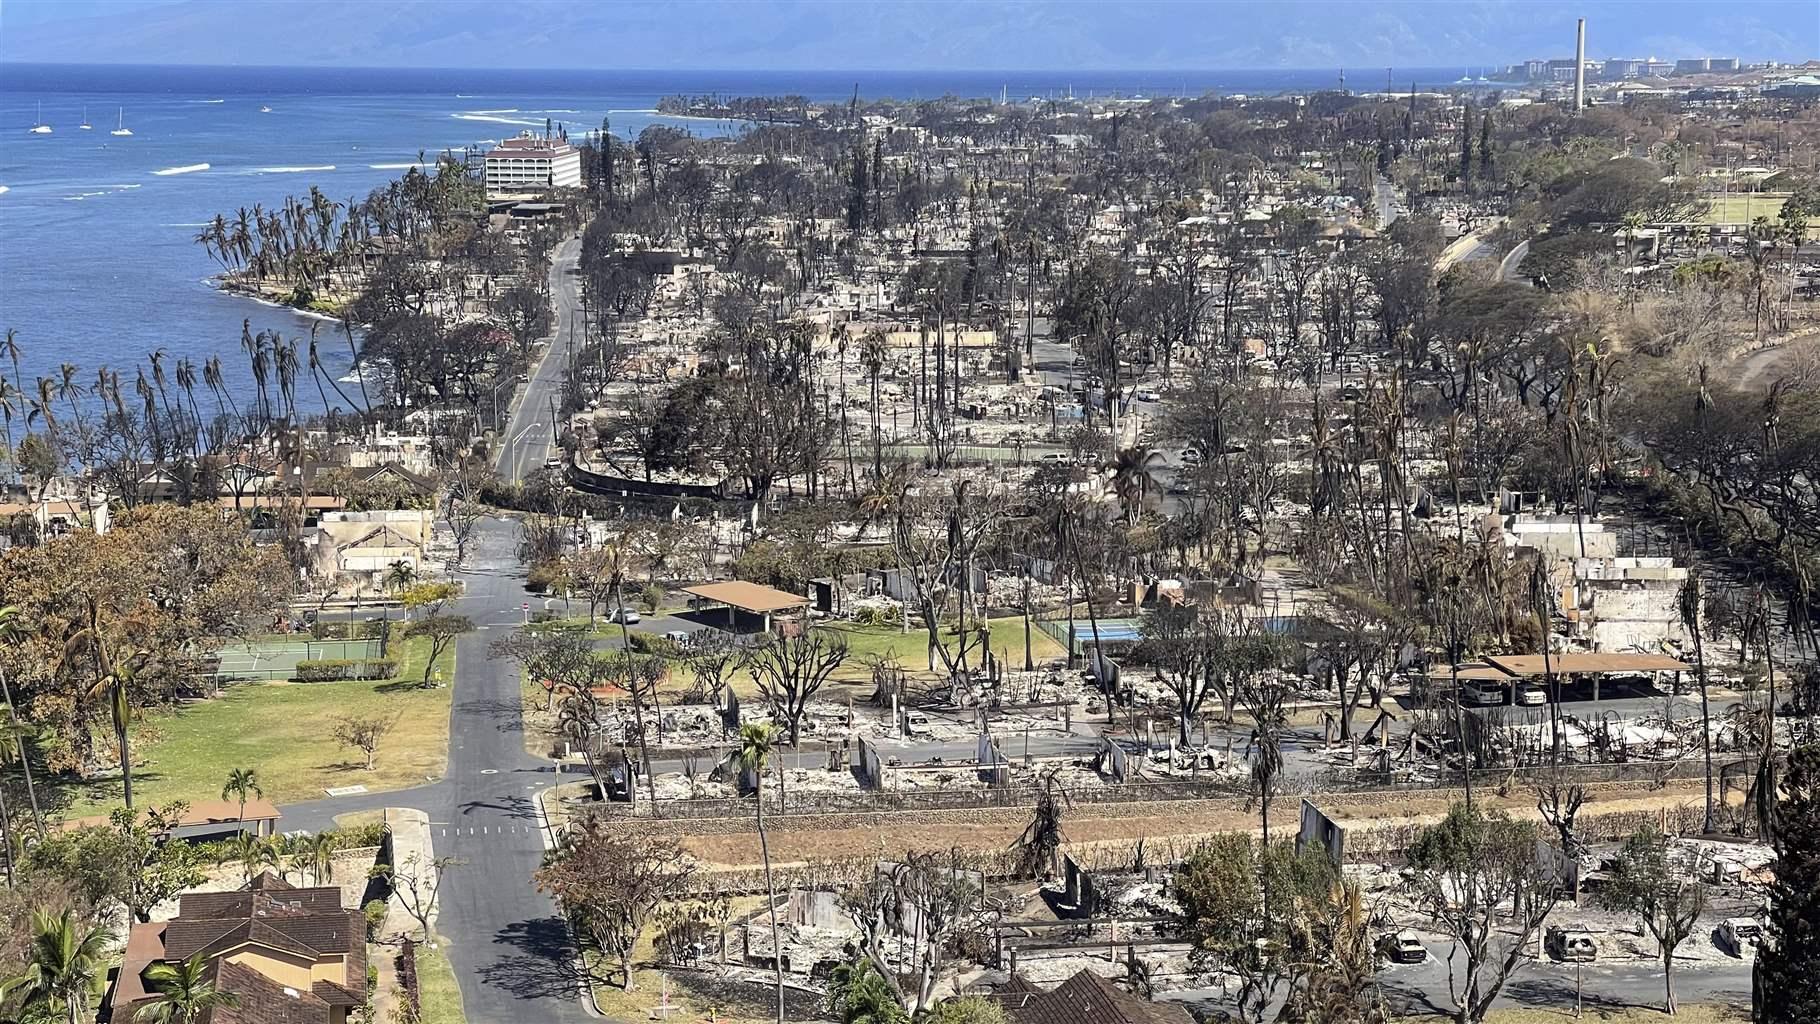 An overhead view of an area full of fire-damaged trees and the foundations of buildings destroyed by fire. In the distance is the ocean and a few houses still stand at the bottom, near the edge of the area destroyed by fire. 